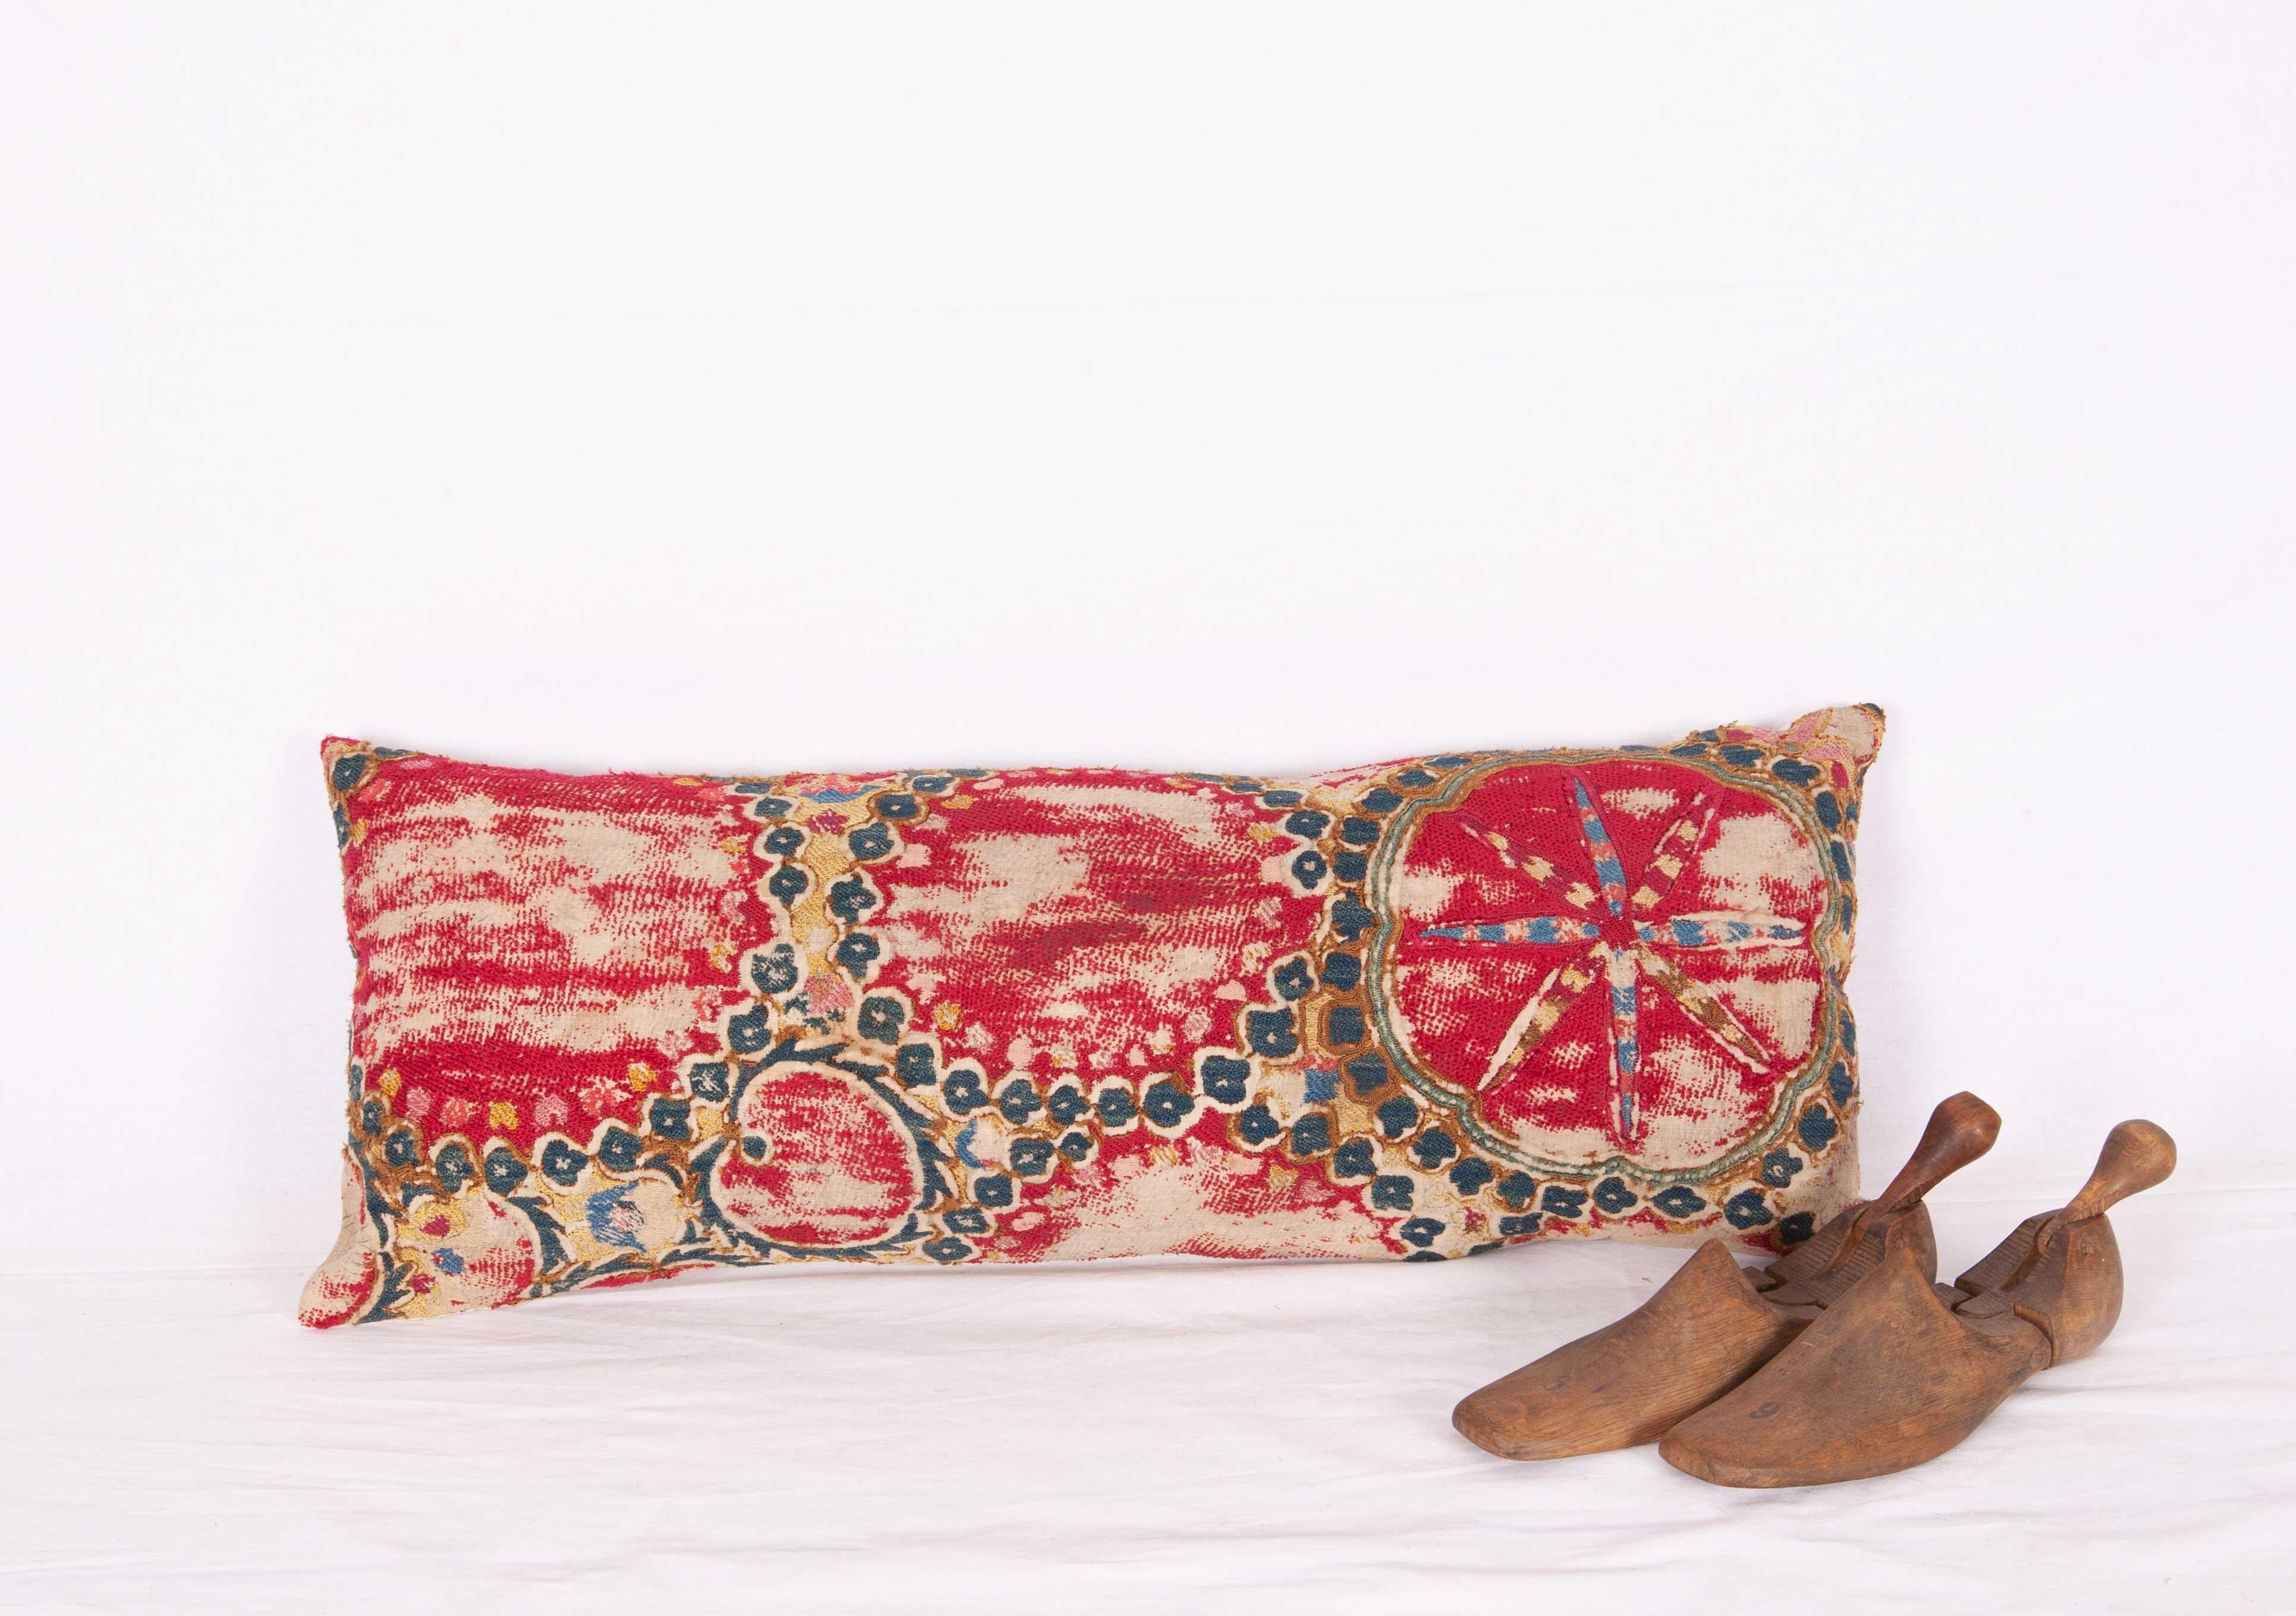 Embroidered Antique Suzani Pillow or Cushion Cover Fashioned from a 19th Century Suzani